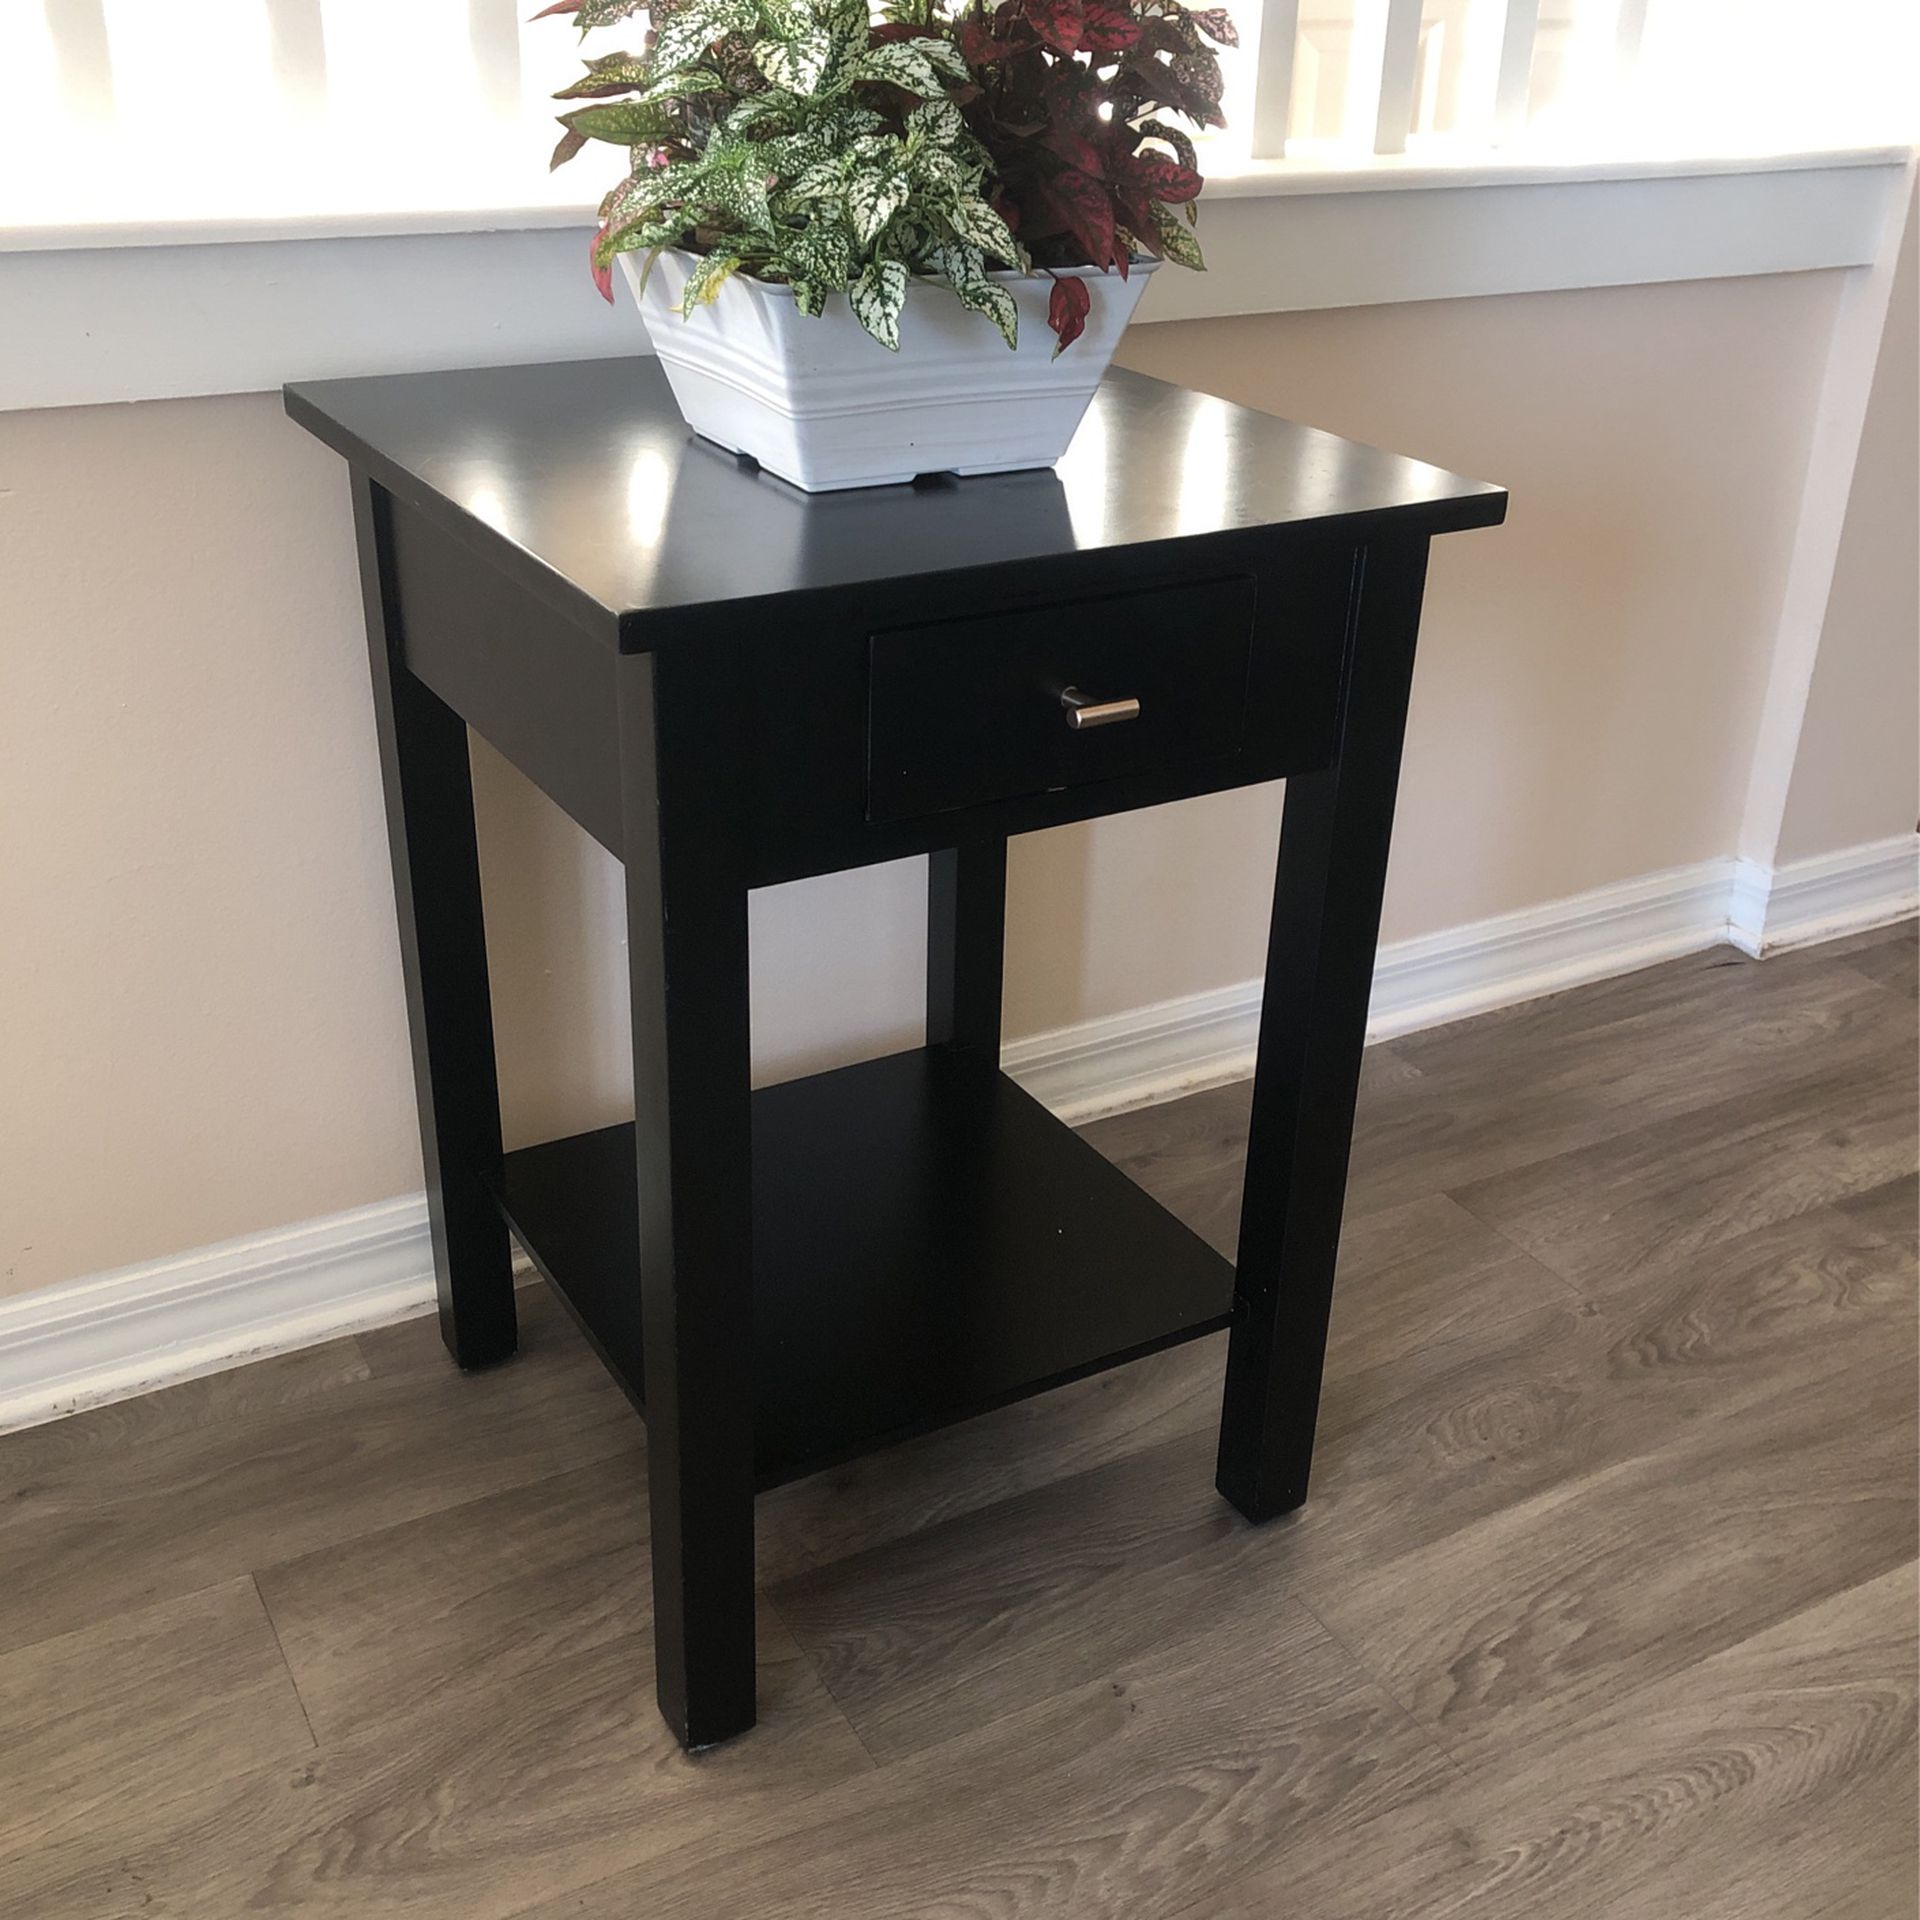 End Table/ Cornet Table/ Nightstand/ Black/ Solid Wood